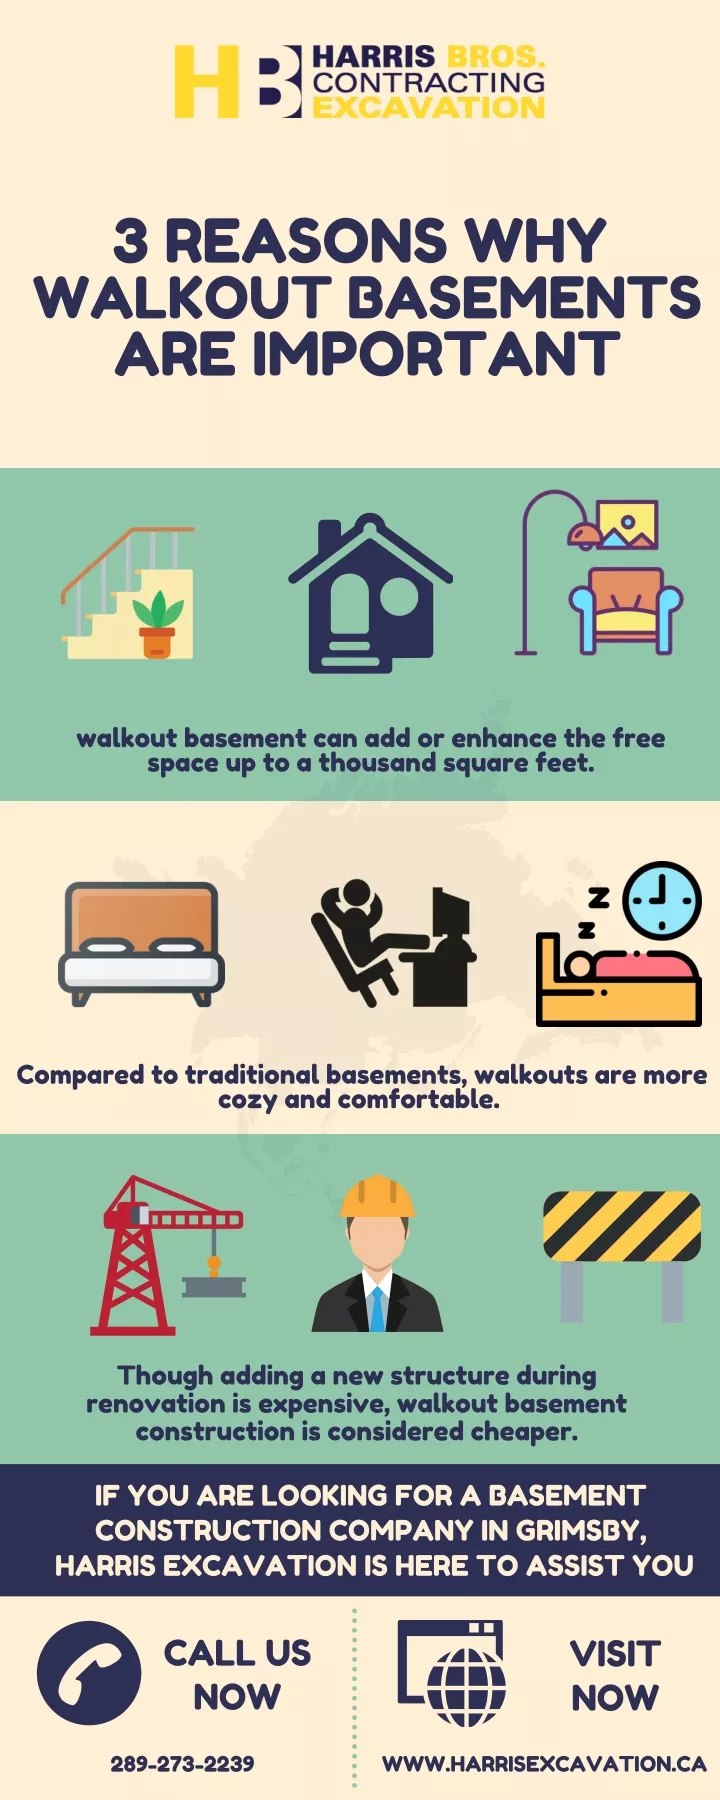 3 reasons why walkout basements are important